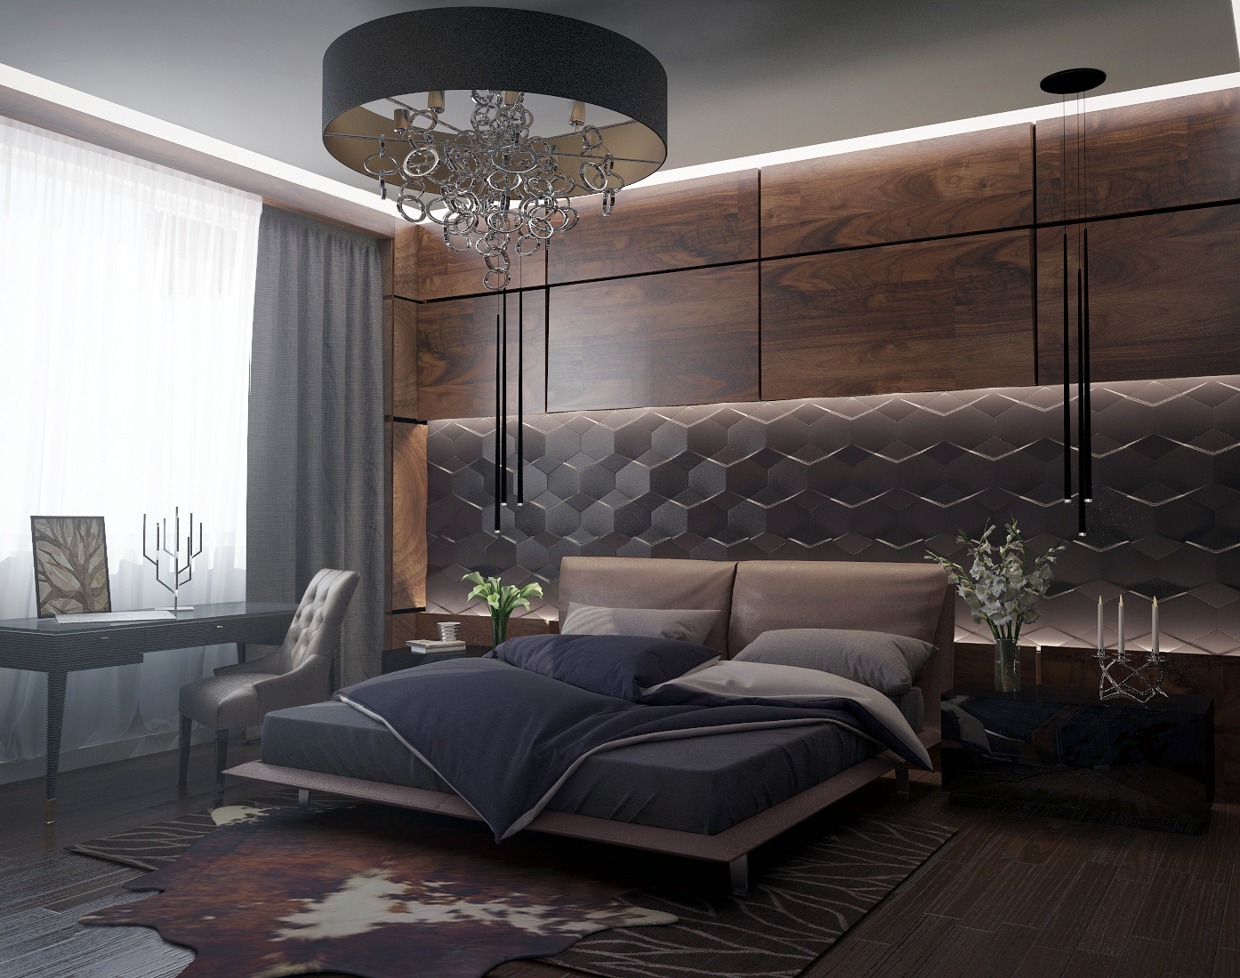 Decoration ideas for dark bedrooms "width =" 1240 "height =" 978 "srcset =" https://mileray.com/wp-content/uploads/2020/05/1588511001_748_15-Awesome-Wall-Texture-For-Your-Bedroom-Decorating-Ideas.jpg 1240w, https://mileray.com /wp-content/uploads/2016/06/Dimitriy-Sivak-300x237.jpg 300w, https://mileray.com/wp-content/uploads/2016/06/Dimitriy-Sivak-768x606.jpg 768w, https: / /mileray.com/wp-content/uploads/2016/06/Dimitriy-Sivak-1024x808.jpg 1024w, https://mileray.com/wp-content/uploads/2016/06/Dimitriy-Sivak-696x549.jpg 696w , https://mileray.com/wp-content/uploads/2016/06/Dimitriy-Sivak-1068x842.jpg 1068w, https://mileray.com/wp-content/uploads/2016/06/Dimitriy-Sivak- 533x420.jpg 533w "sizes =" (maximum width: 1240px) 100vw, 1240px